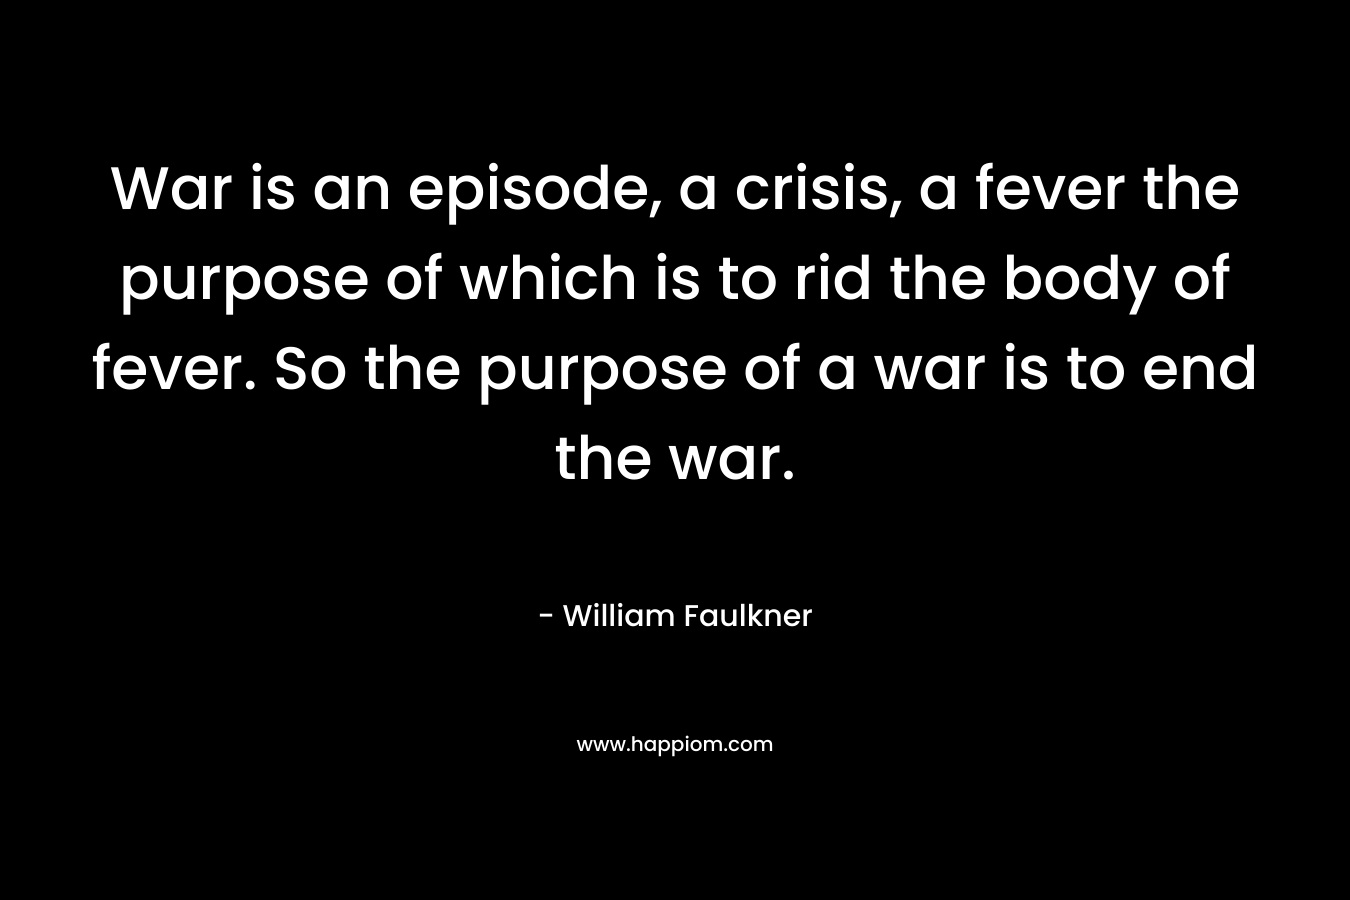 War is an episode, a crisis, a fever the purpose of which is to rid the body of fever. So the purpose of a war is to end the war. – William Faulkner